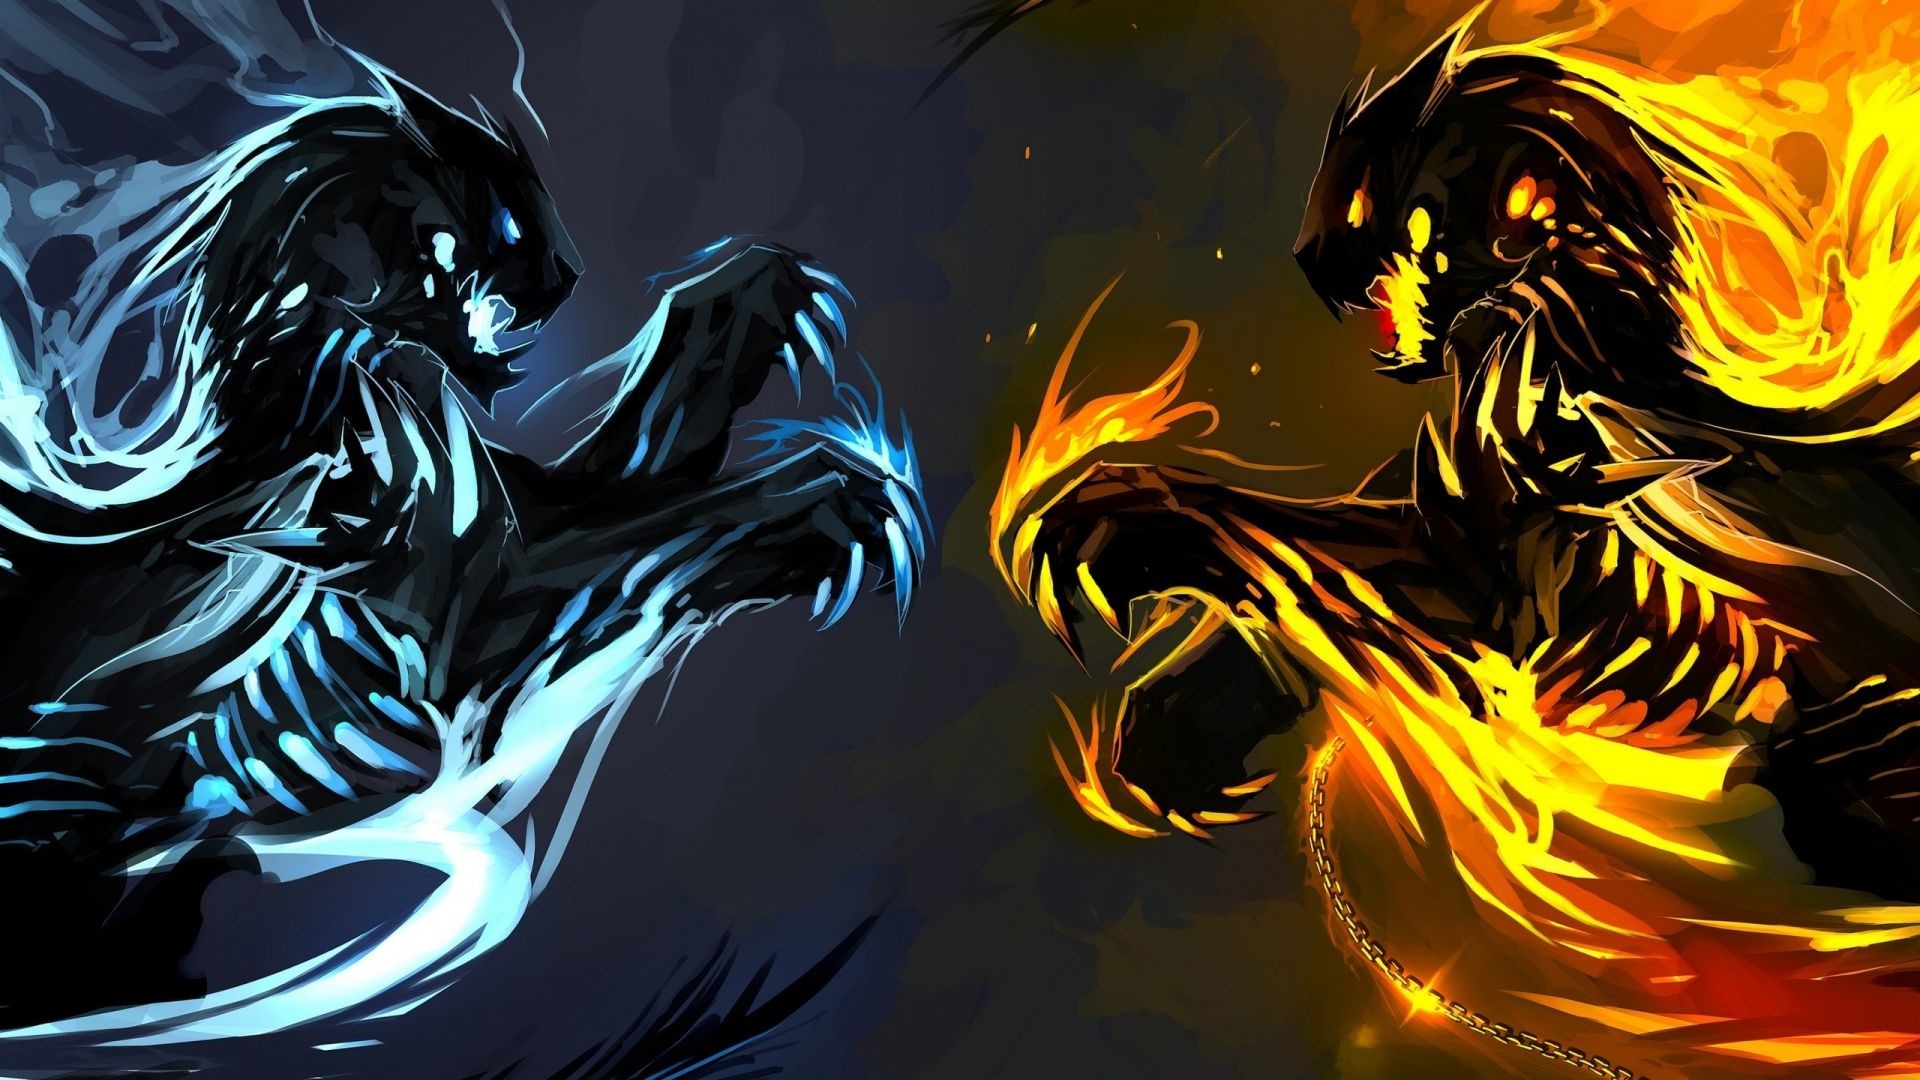 1920x1080 Ice and Fire Dragons wallpaper 2560x1440 - wsnlol